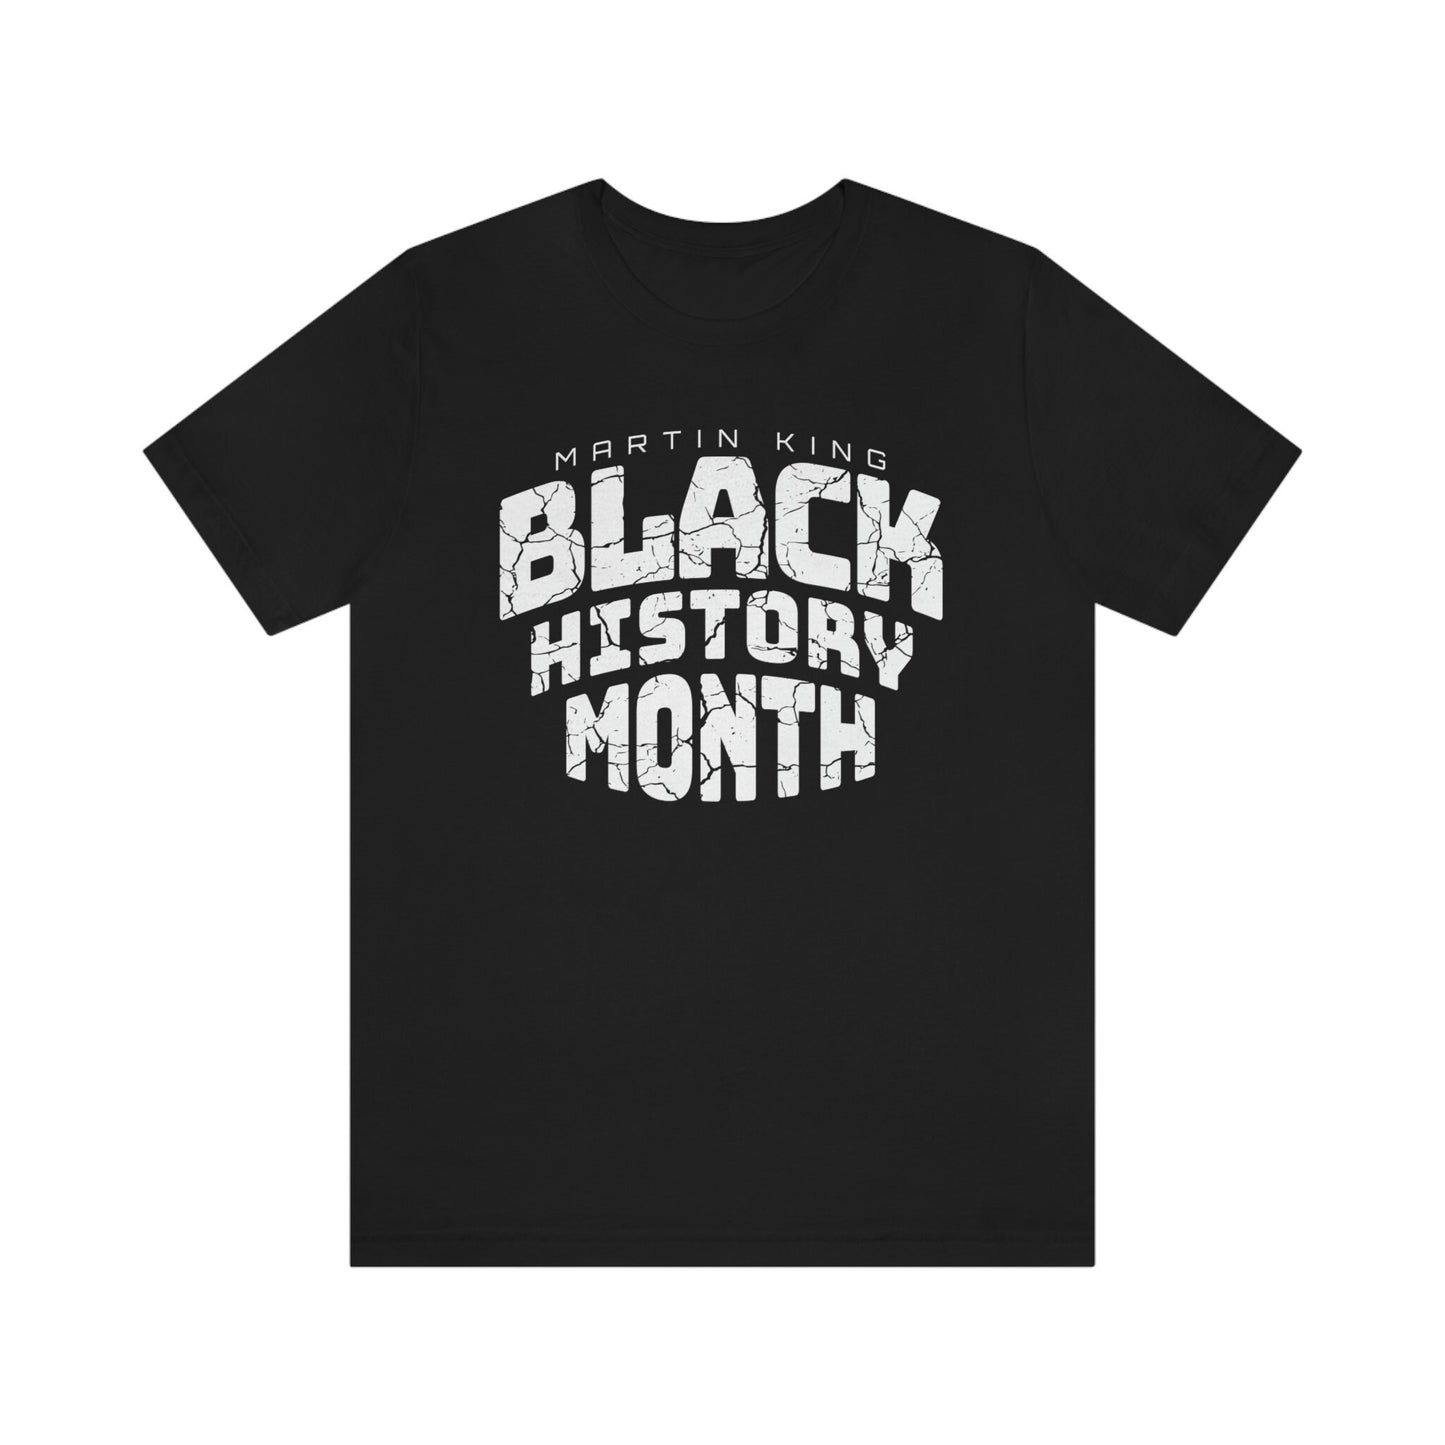 Black History Month personalized gift t-shirt with your name, Black Lives Matter